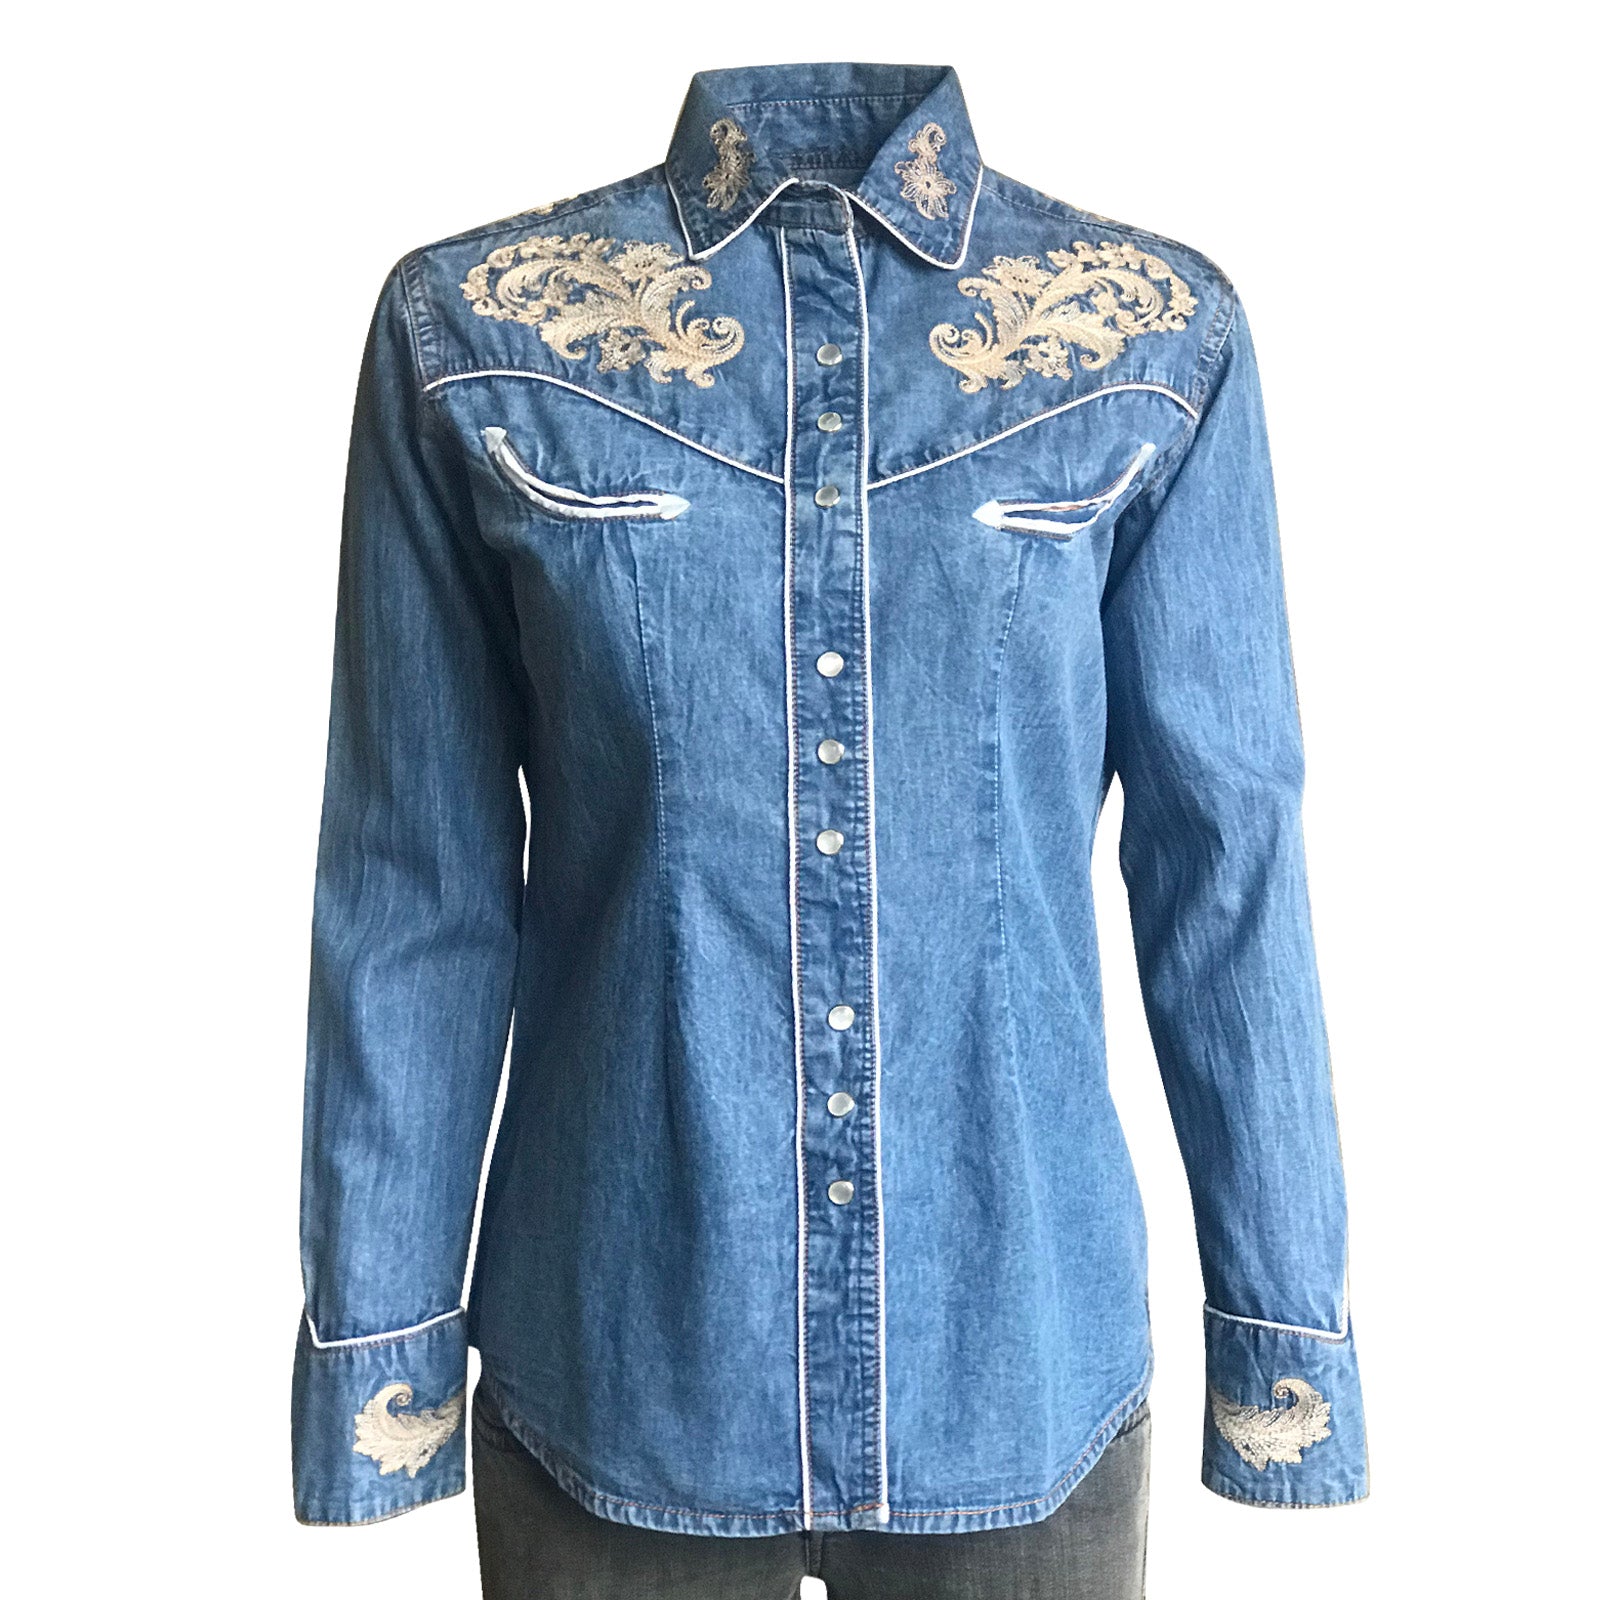 Rockmount Women's Denim Shirt with Floral Embroidery